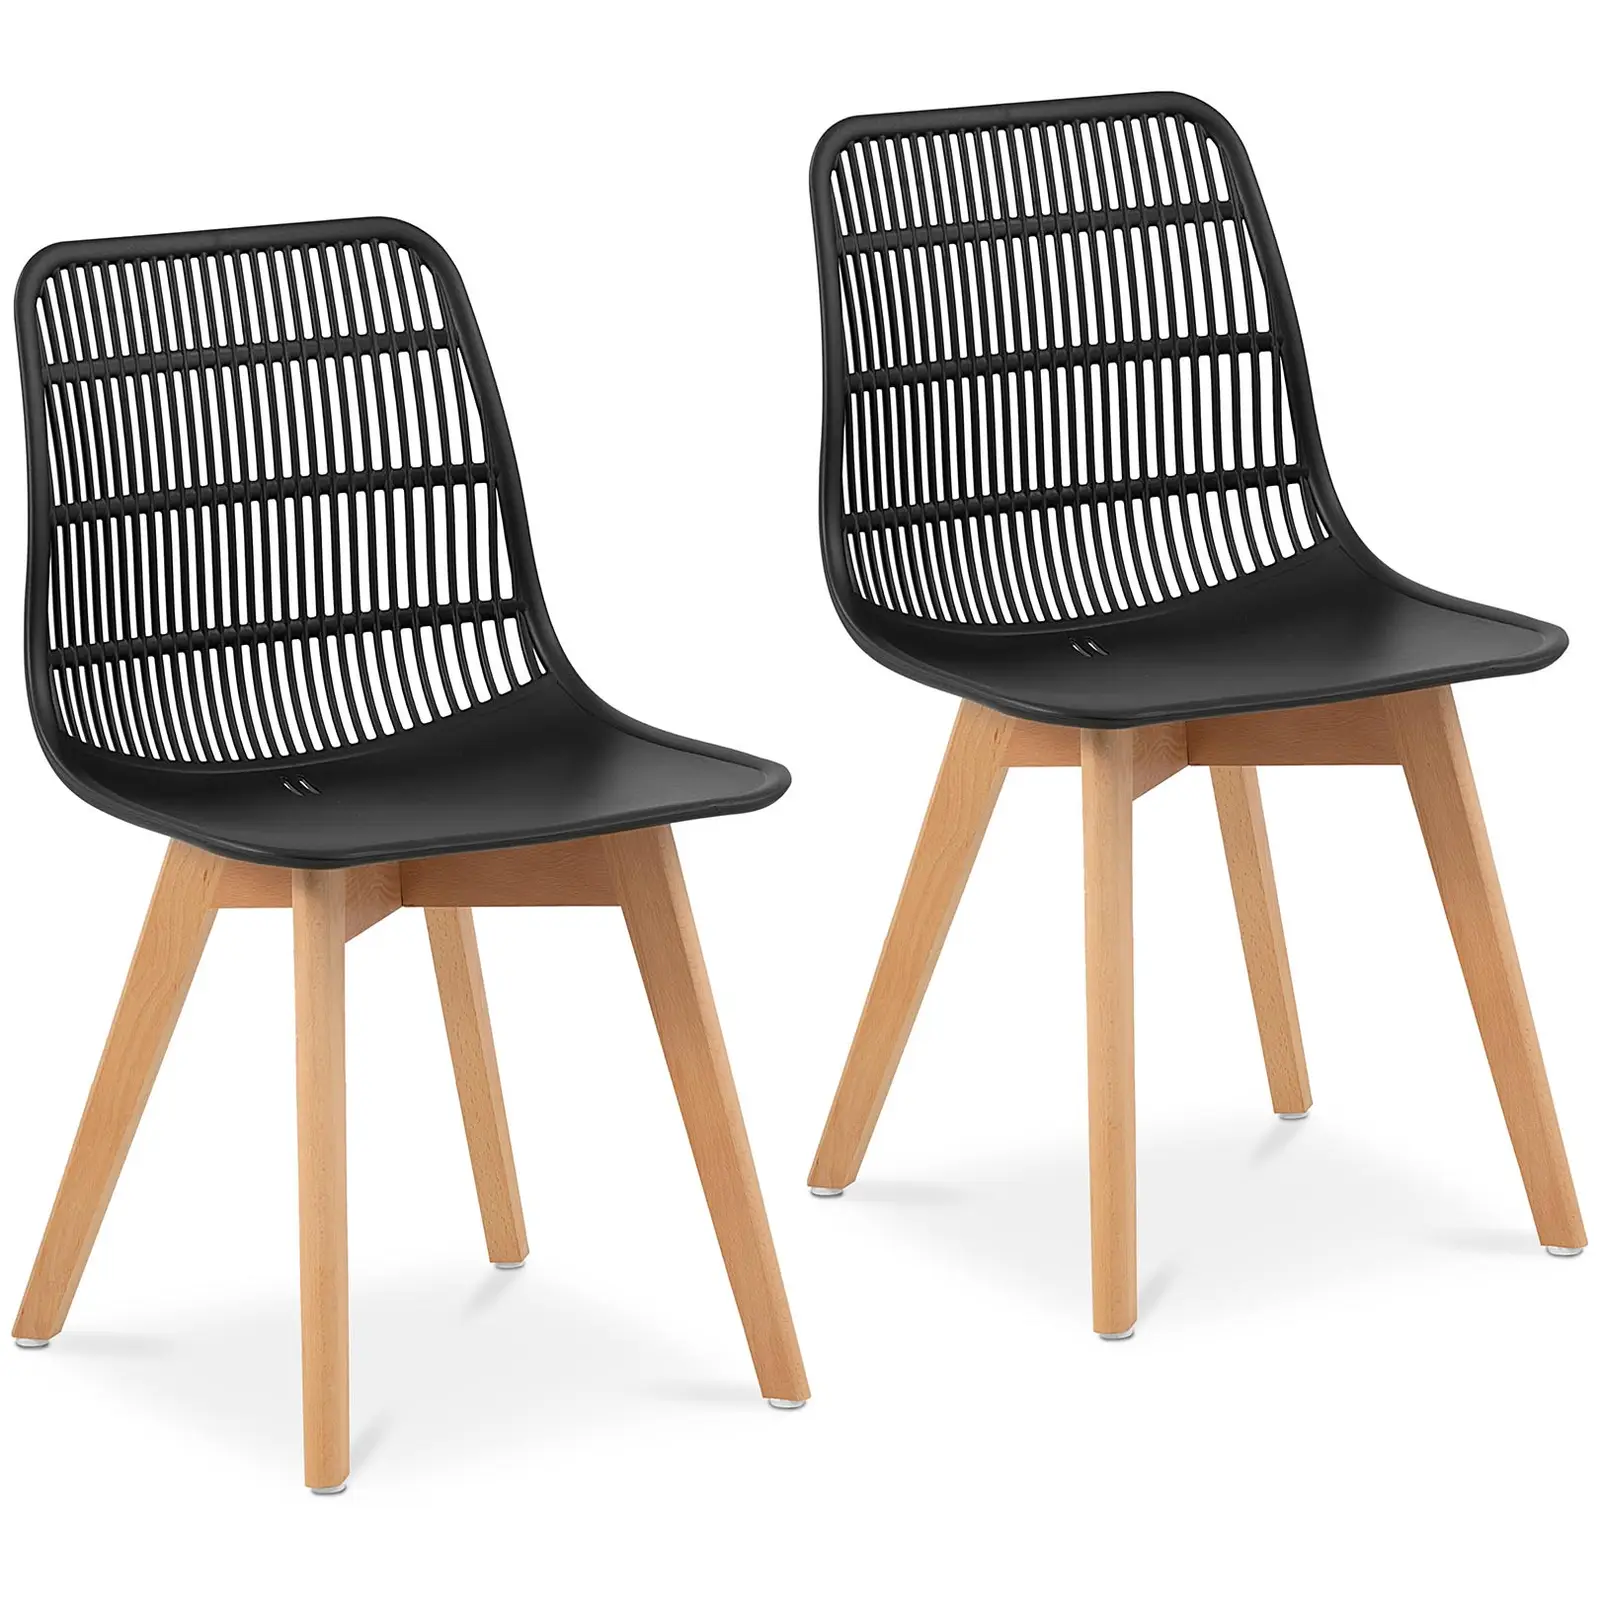 Chair - set of 2 - up to 150 kg - seat area 460x460x450 mm - Black